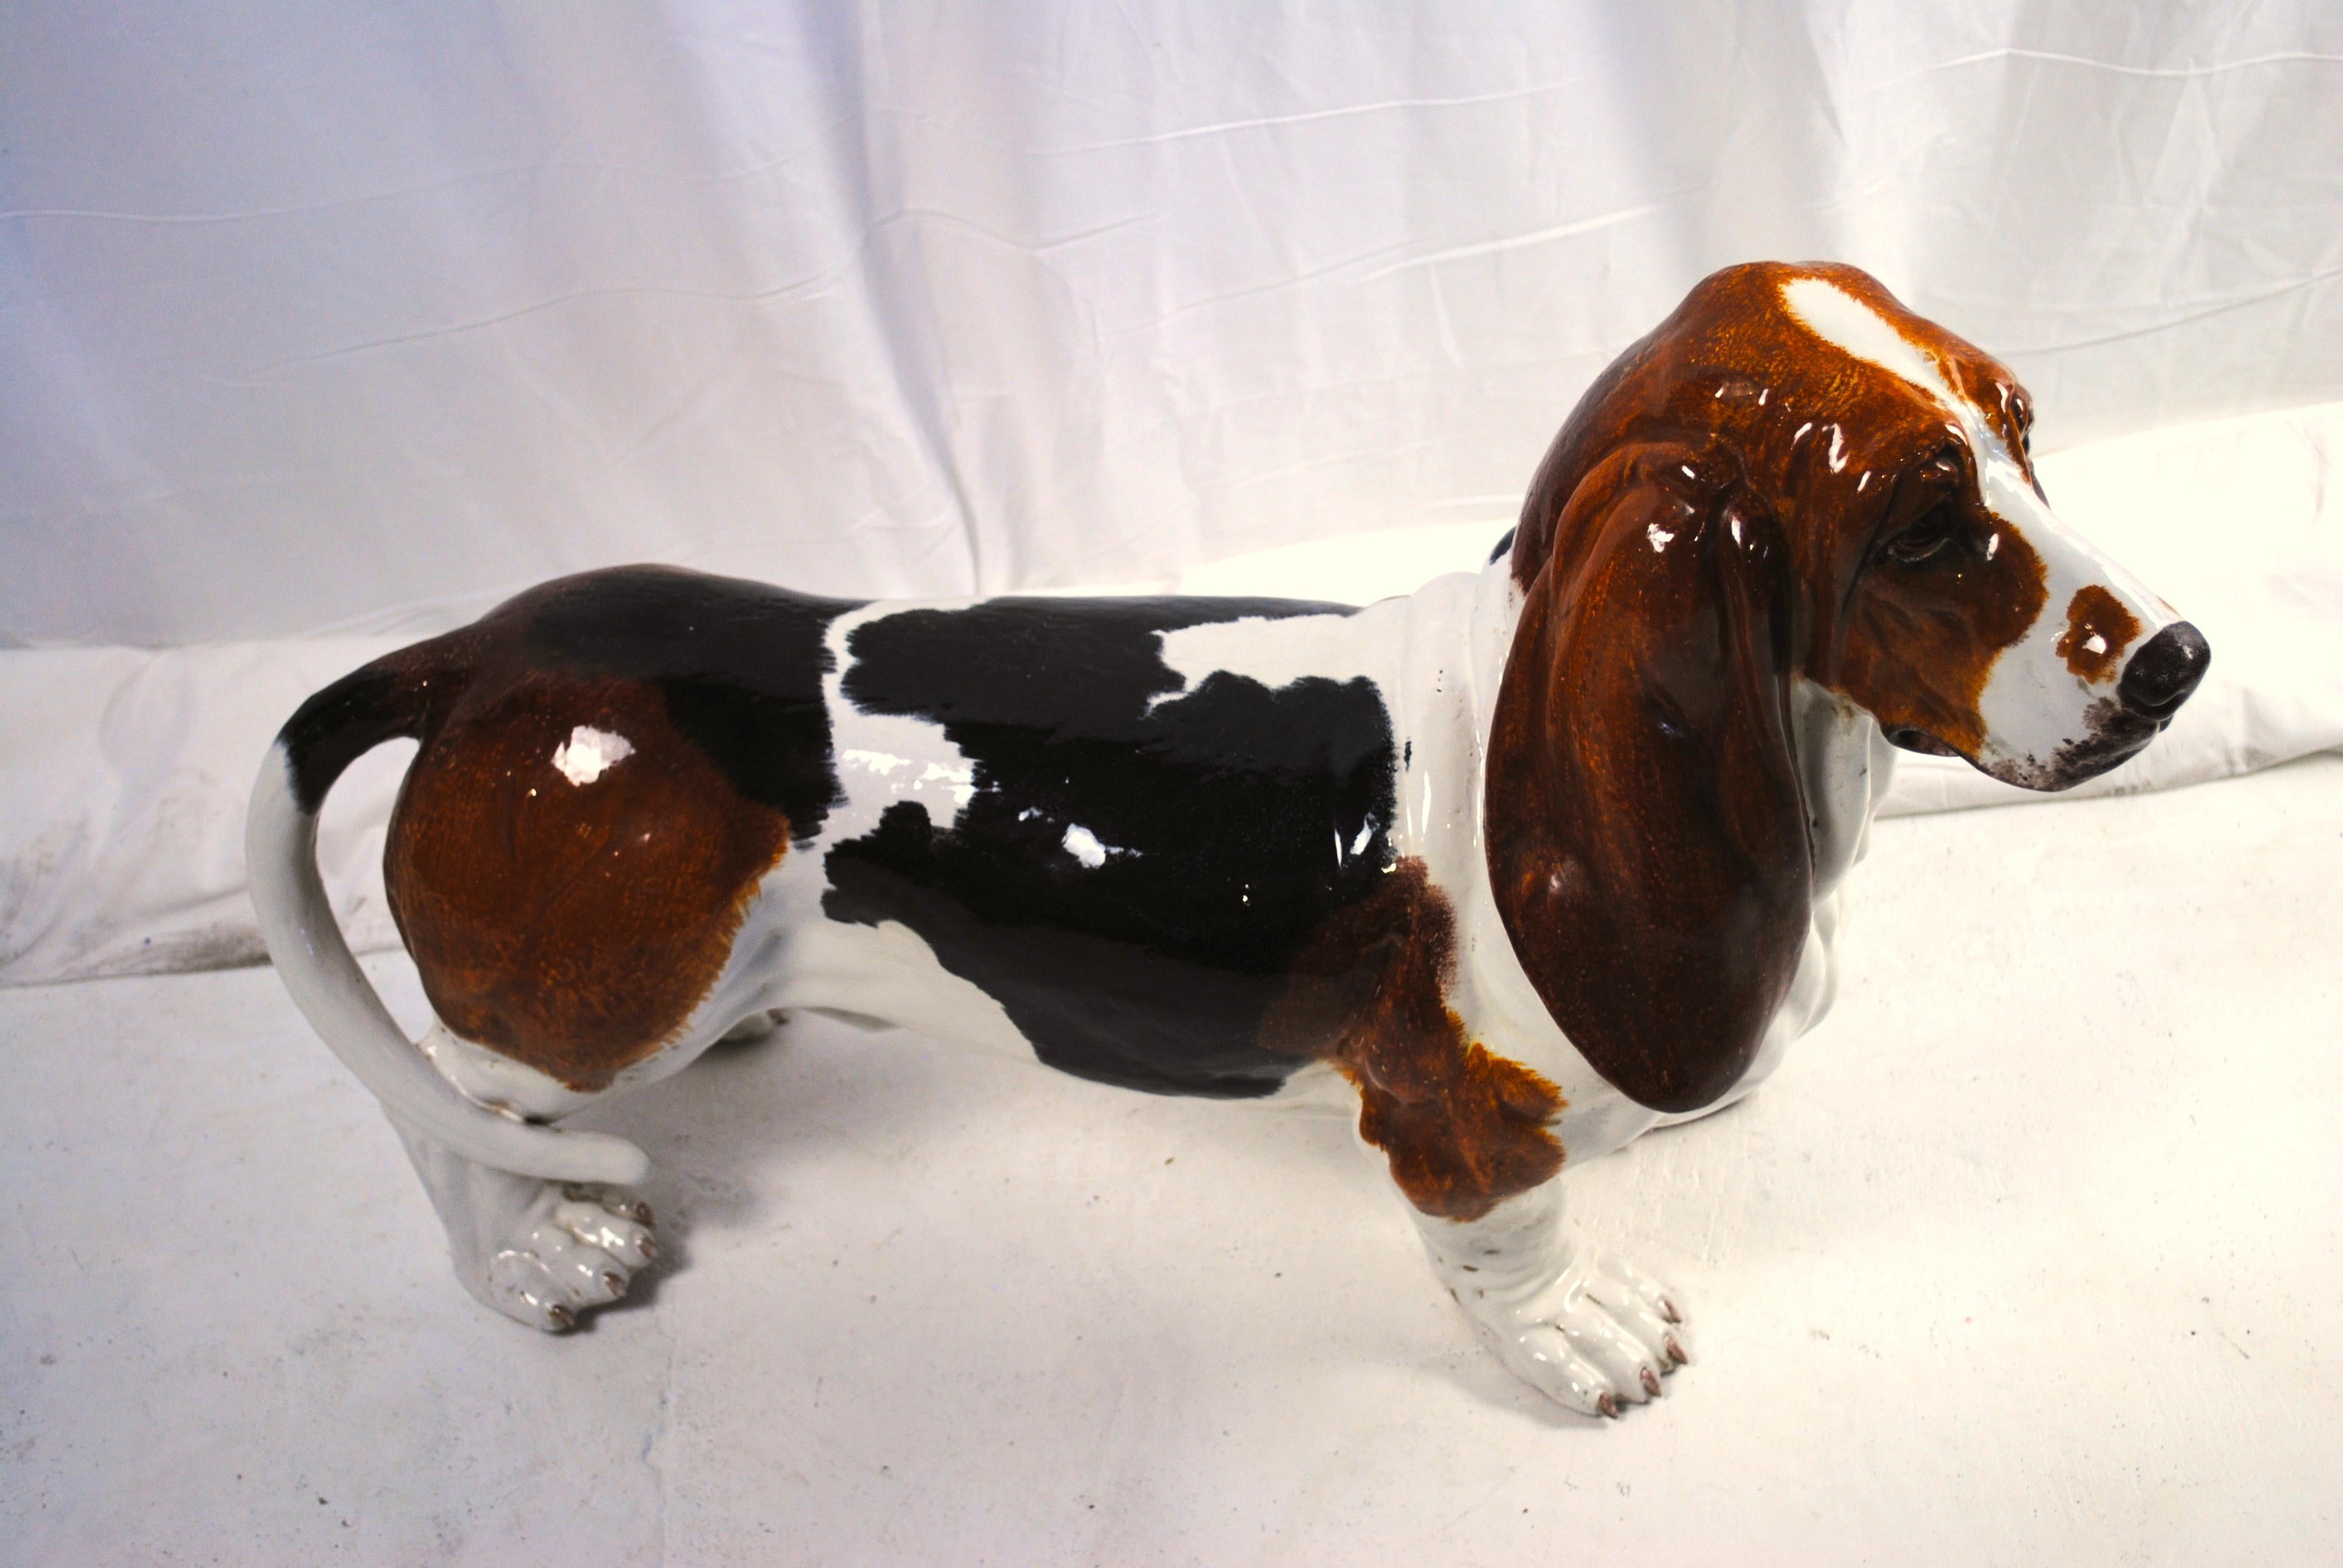 A ceramic figure of a life-size basset hound, dated 1907s. A rear and adorable depiction of a basset hound. Unmarked but very probably made by Montebello in Italy. 
Very good glaze and casting. The stance and expression is very lifelike and the